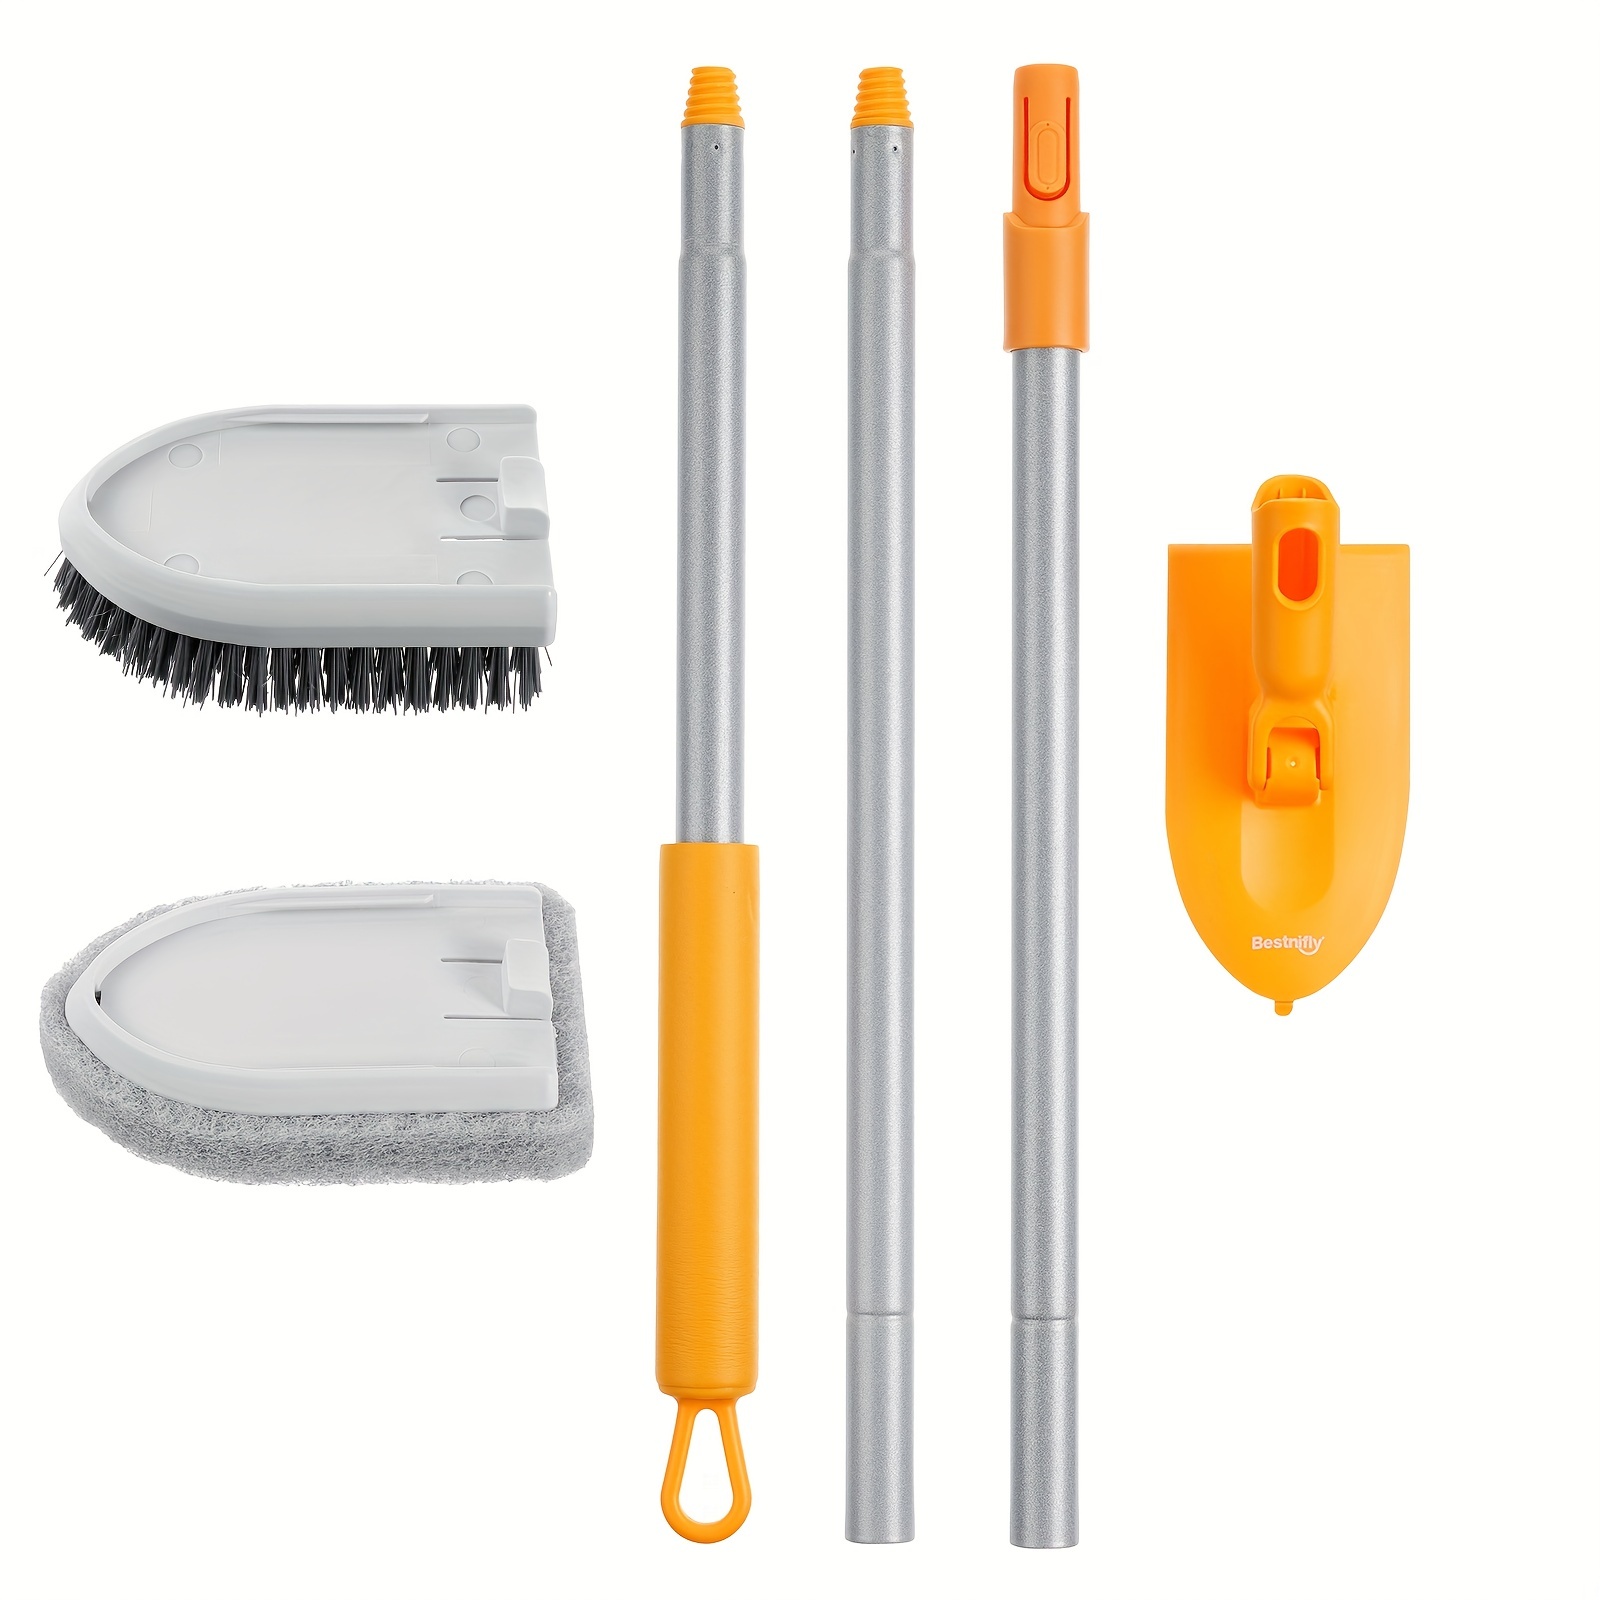 Casabella Extendable Bathroom Shower, Tub, and Tile Scrubber Brush for  Cleaning